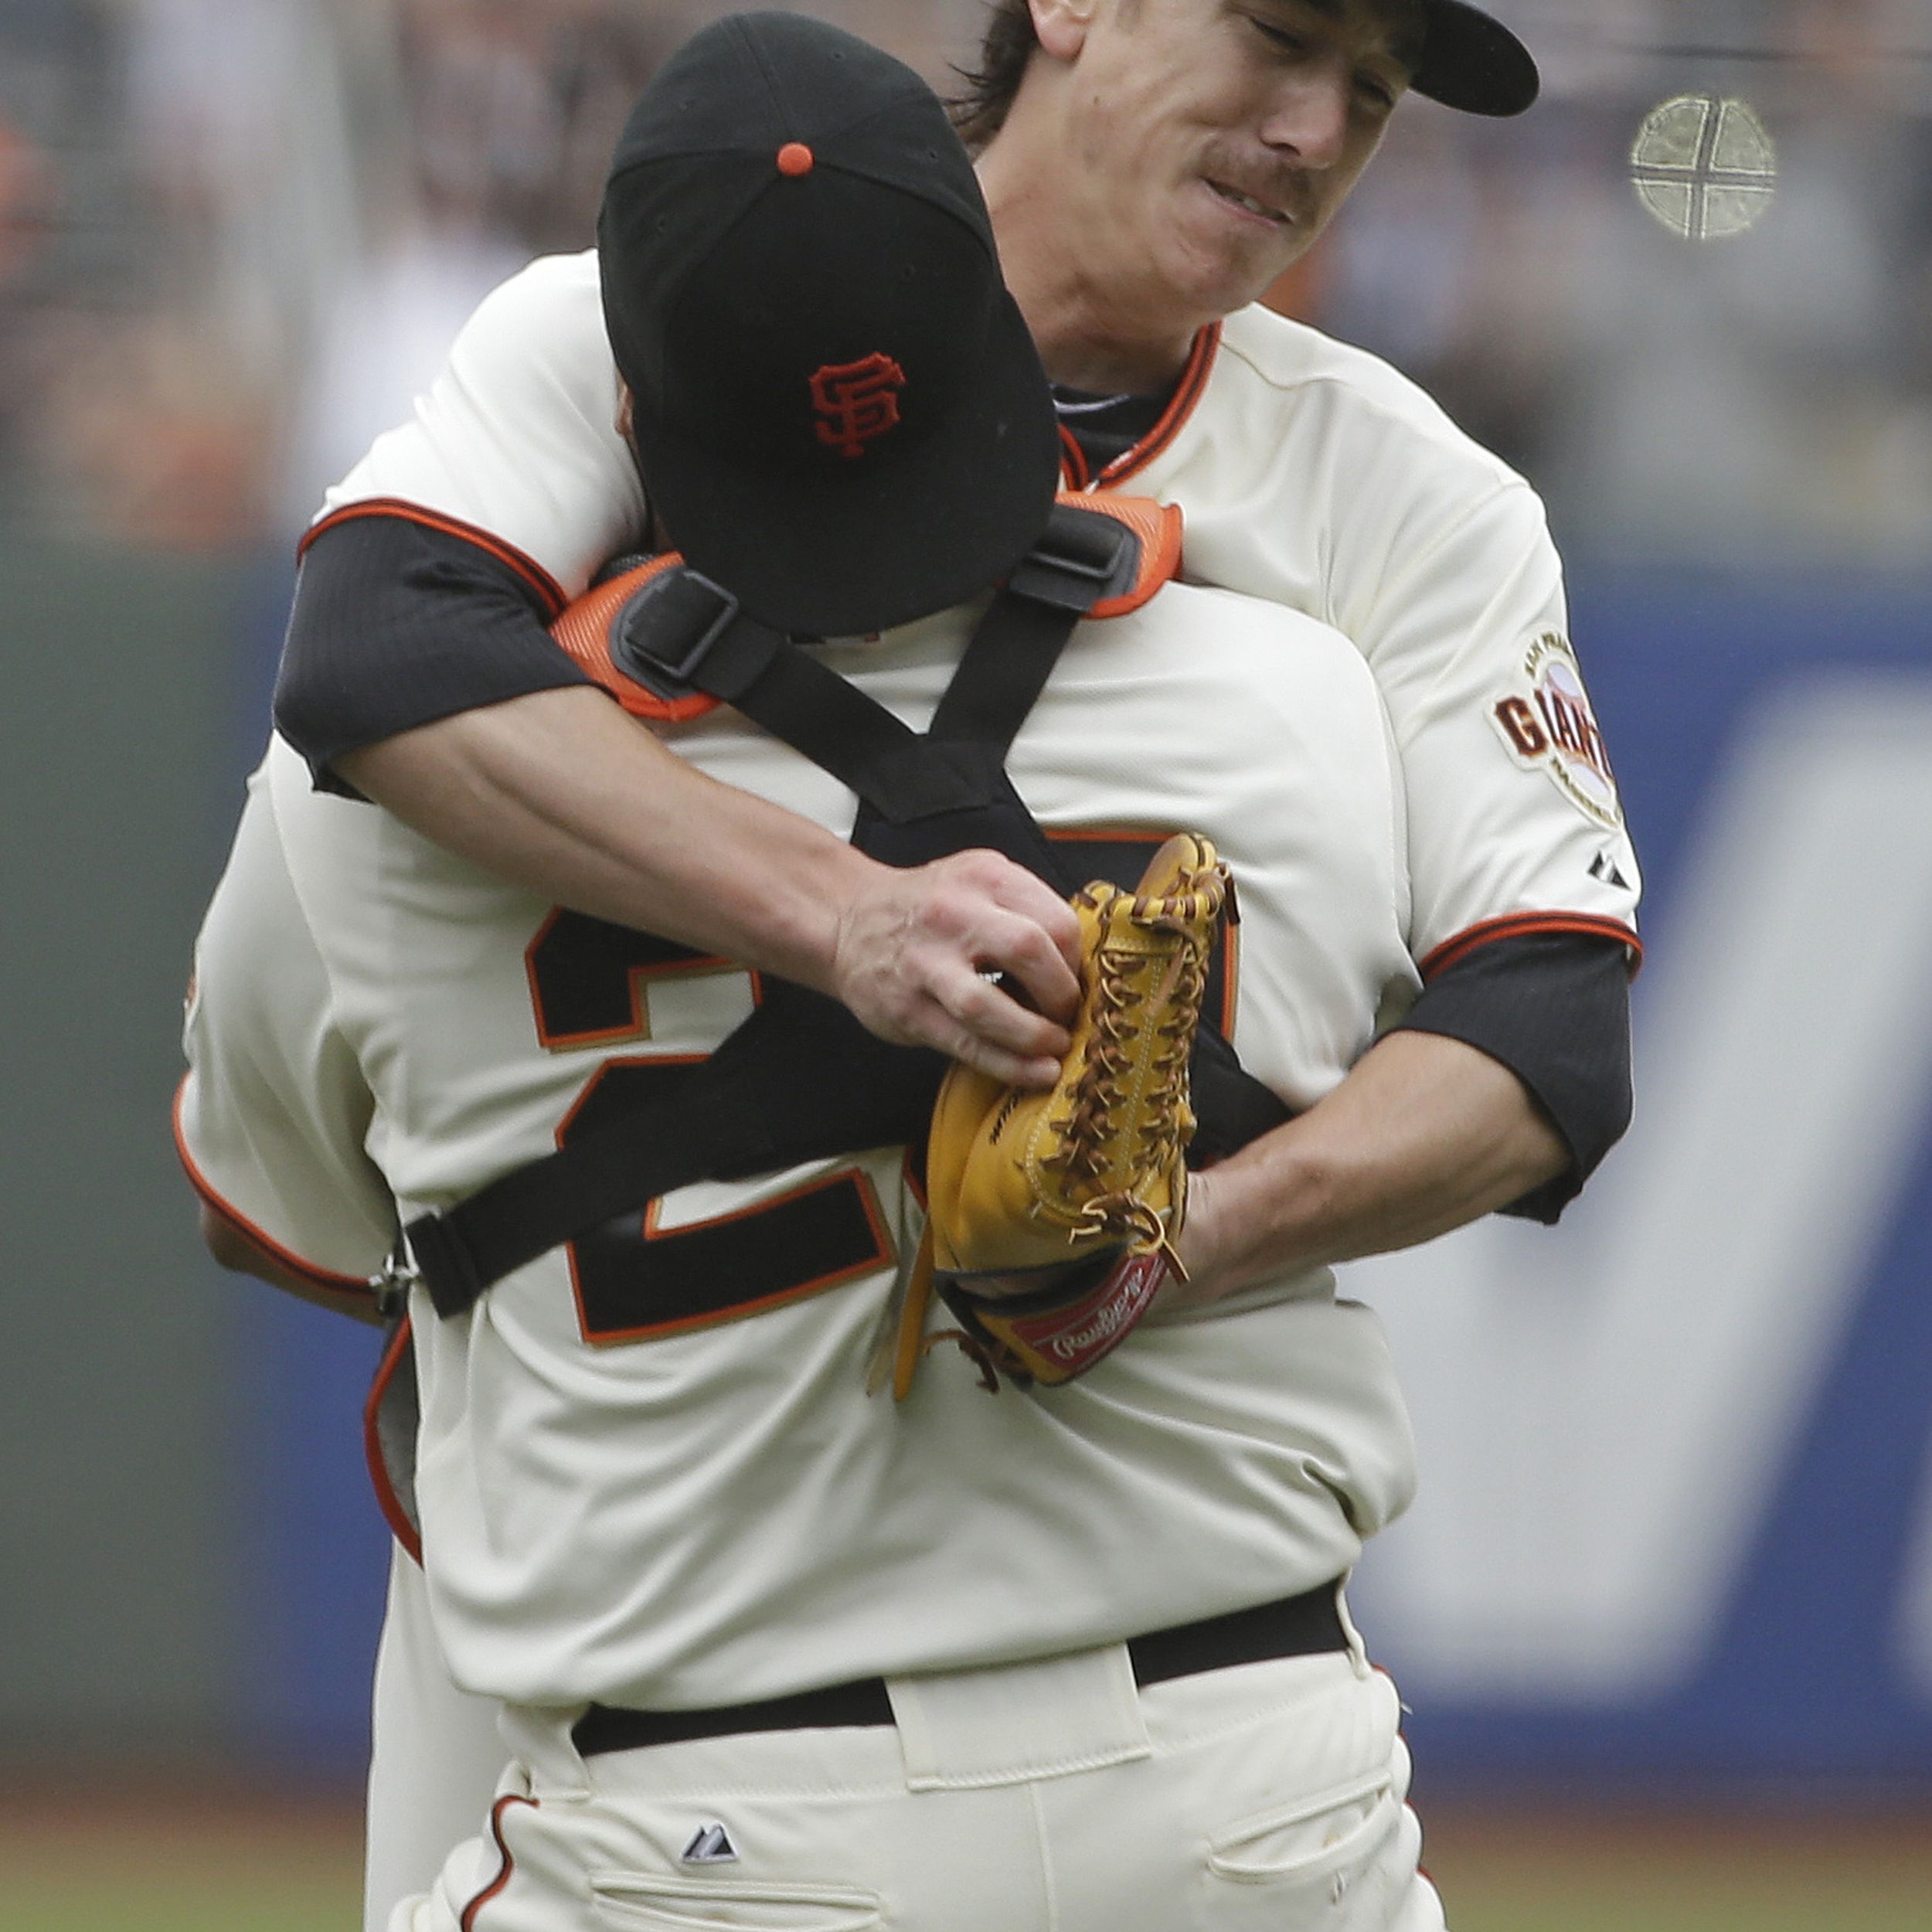 Undaunted in minors, Tim Lincecum determined to get back to the